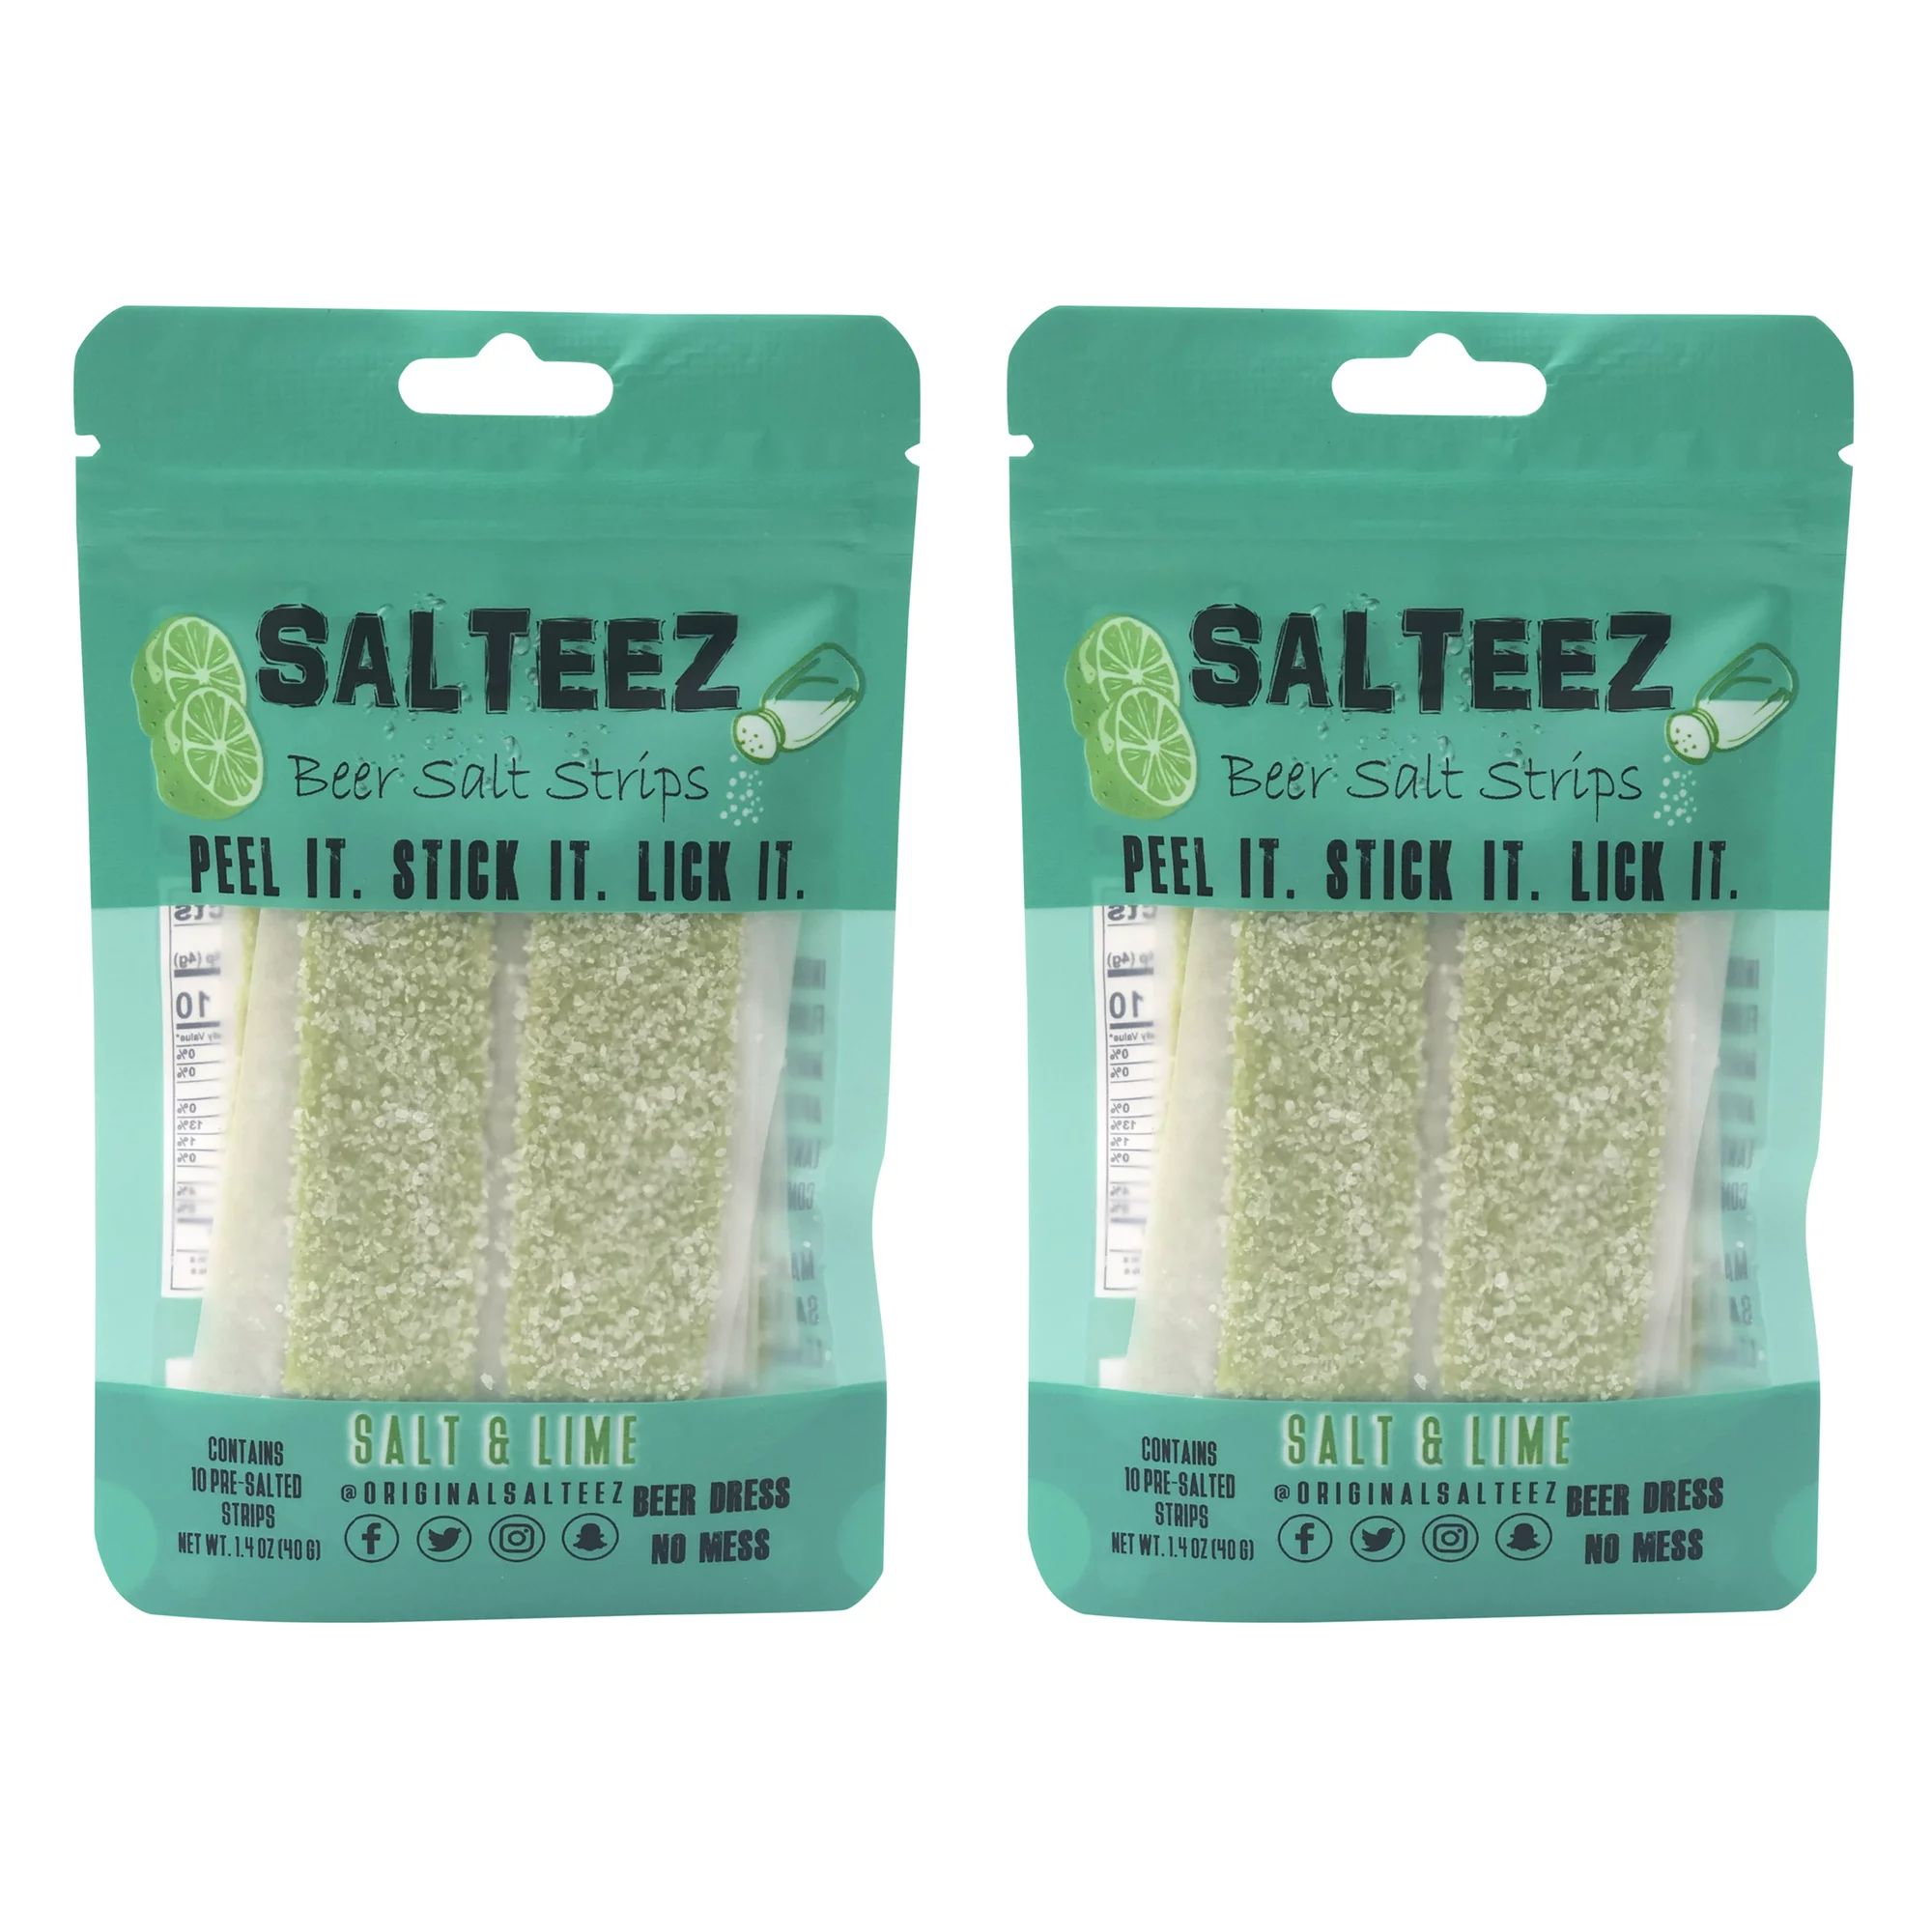 Salteez Beer Salt Strips: Real Salt & Lime Flavor Strips That Stick to Your Bottle, Can, or Cup -... | Walmart (US)